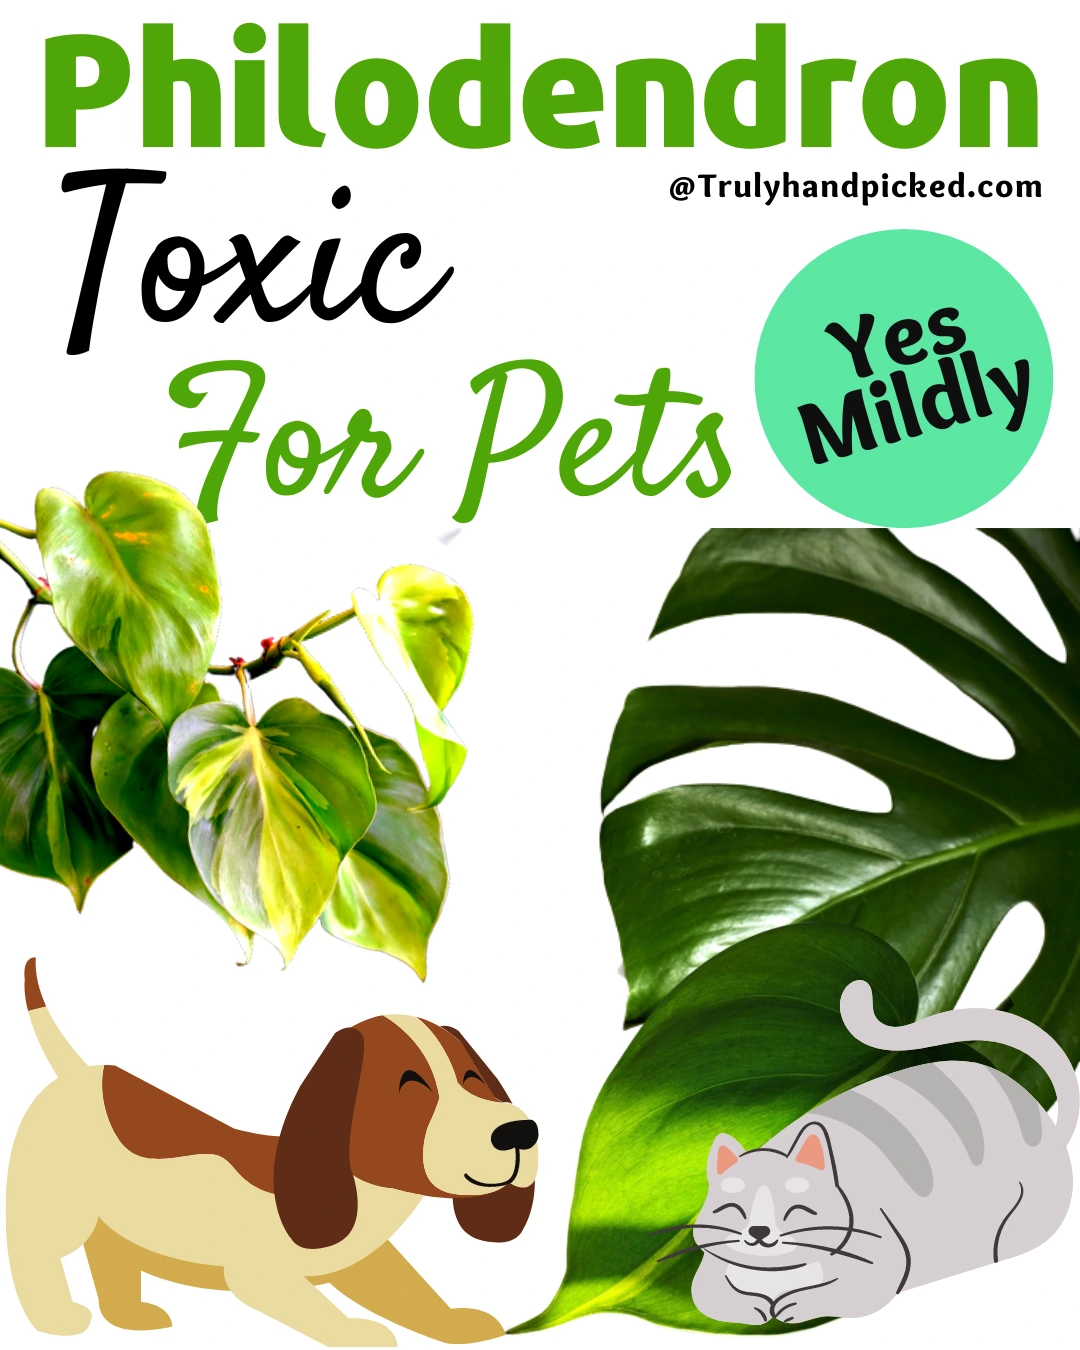 Is Philodendron Toxic for Pets